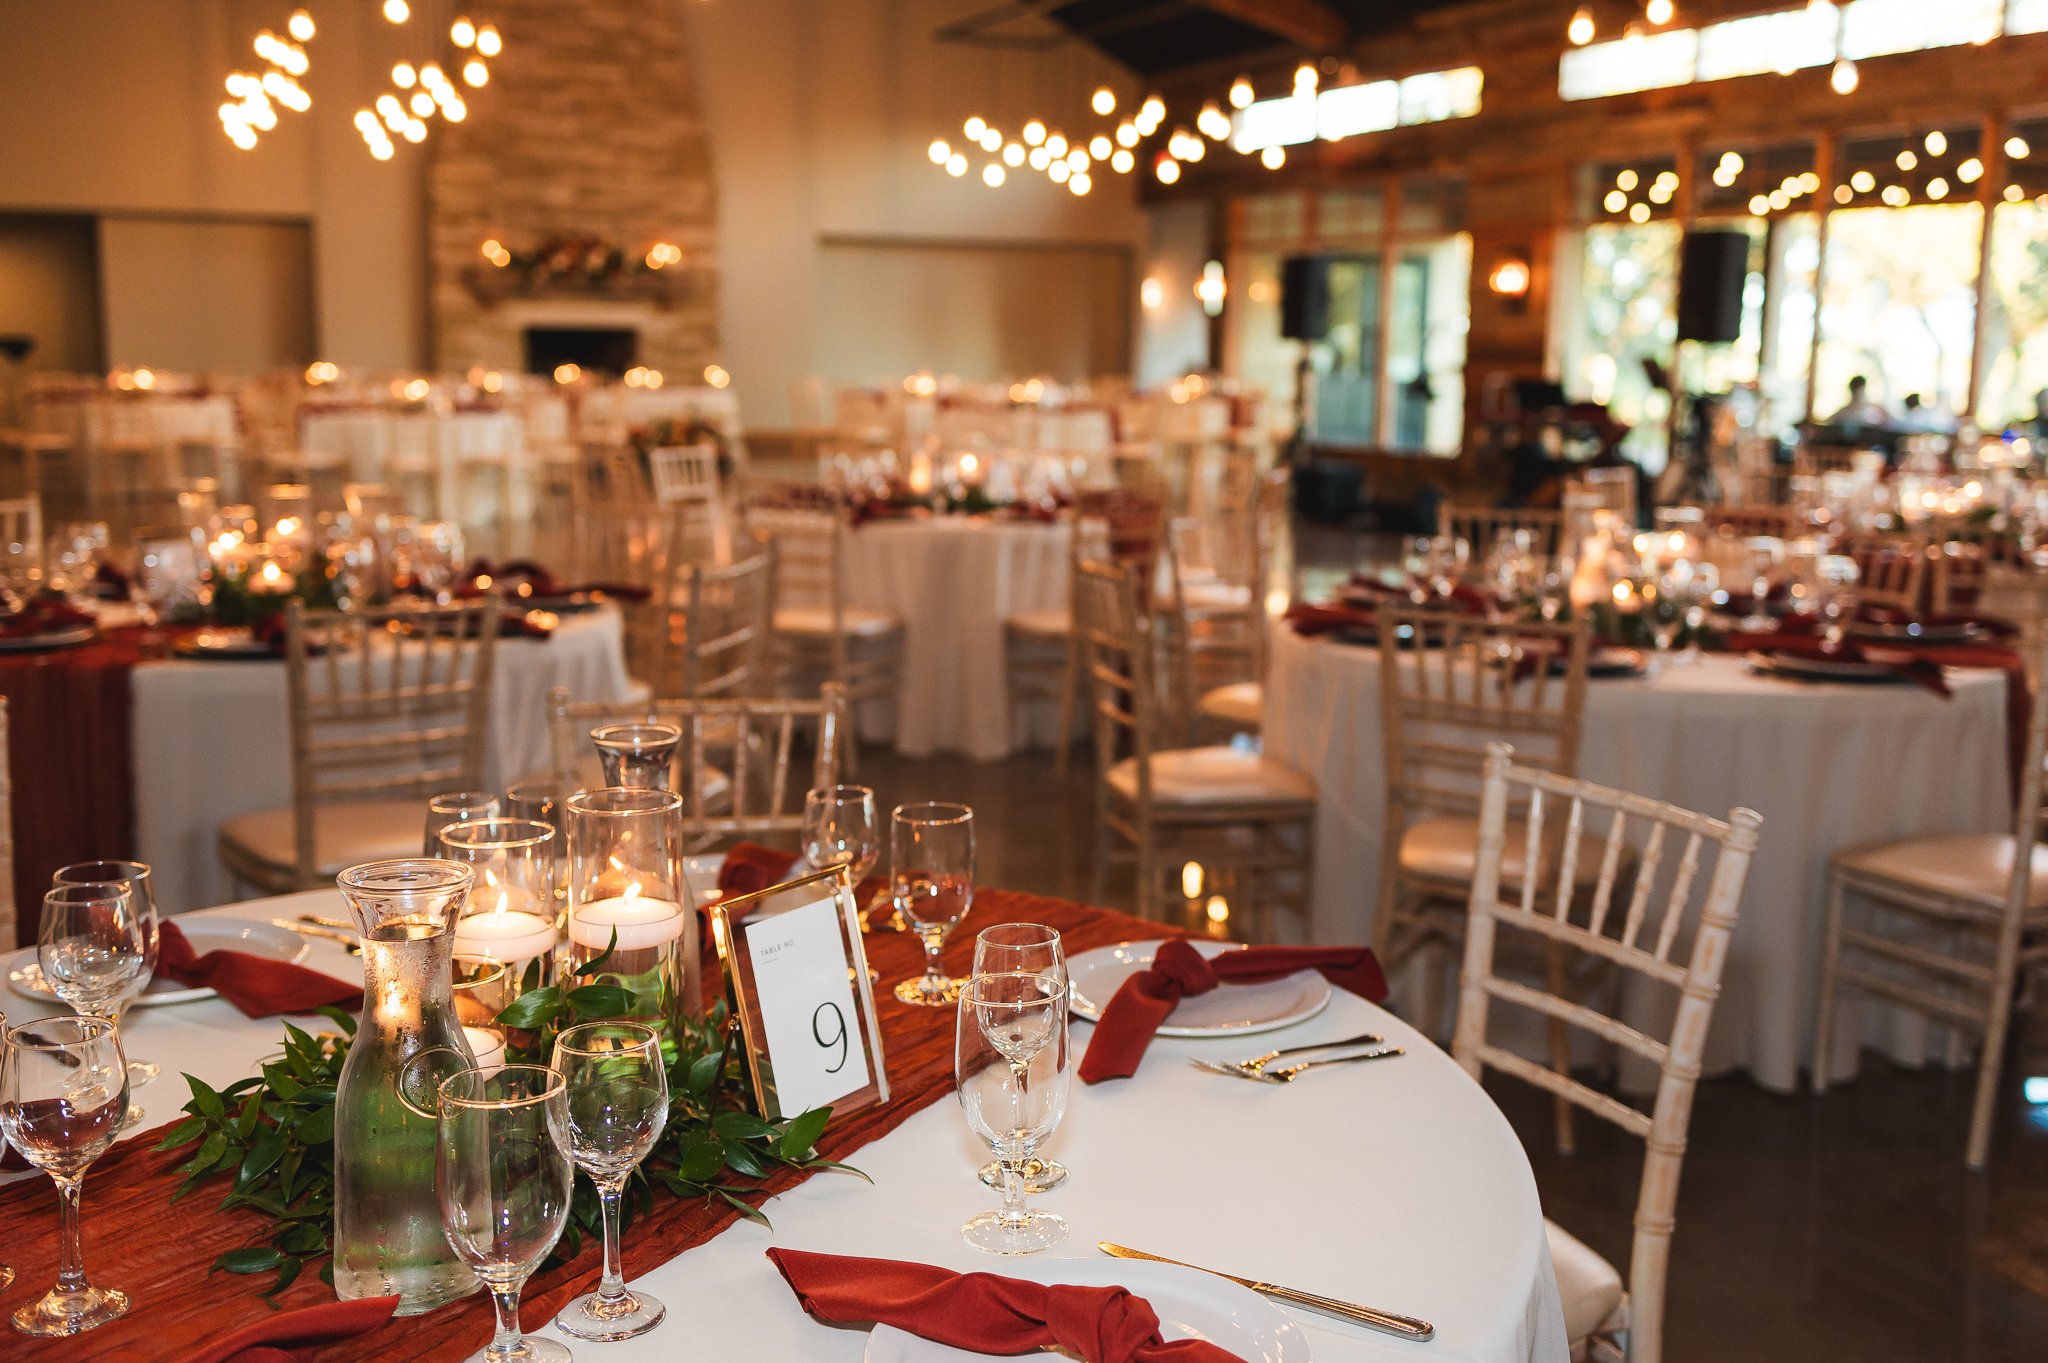 Find sunlit serenity at wedding venues in Texas. Let the warmth of natural light illuminate your wedding journey.